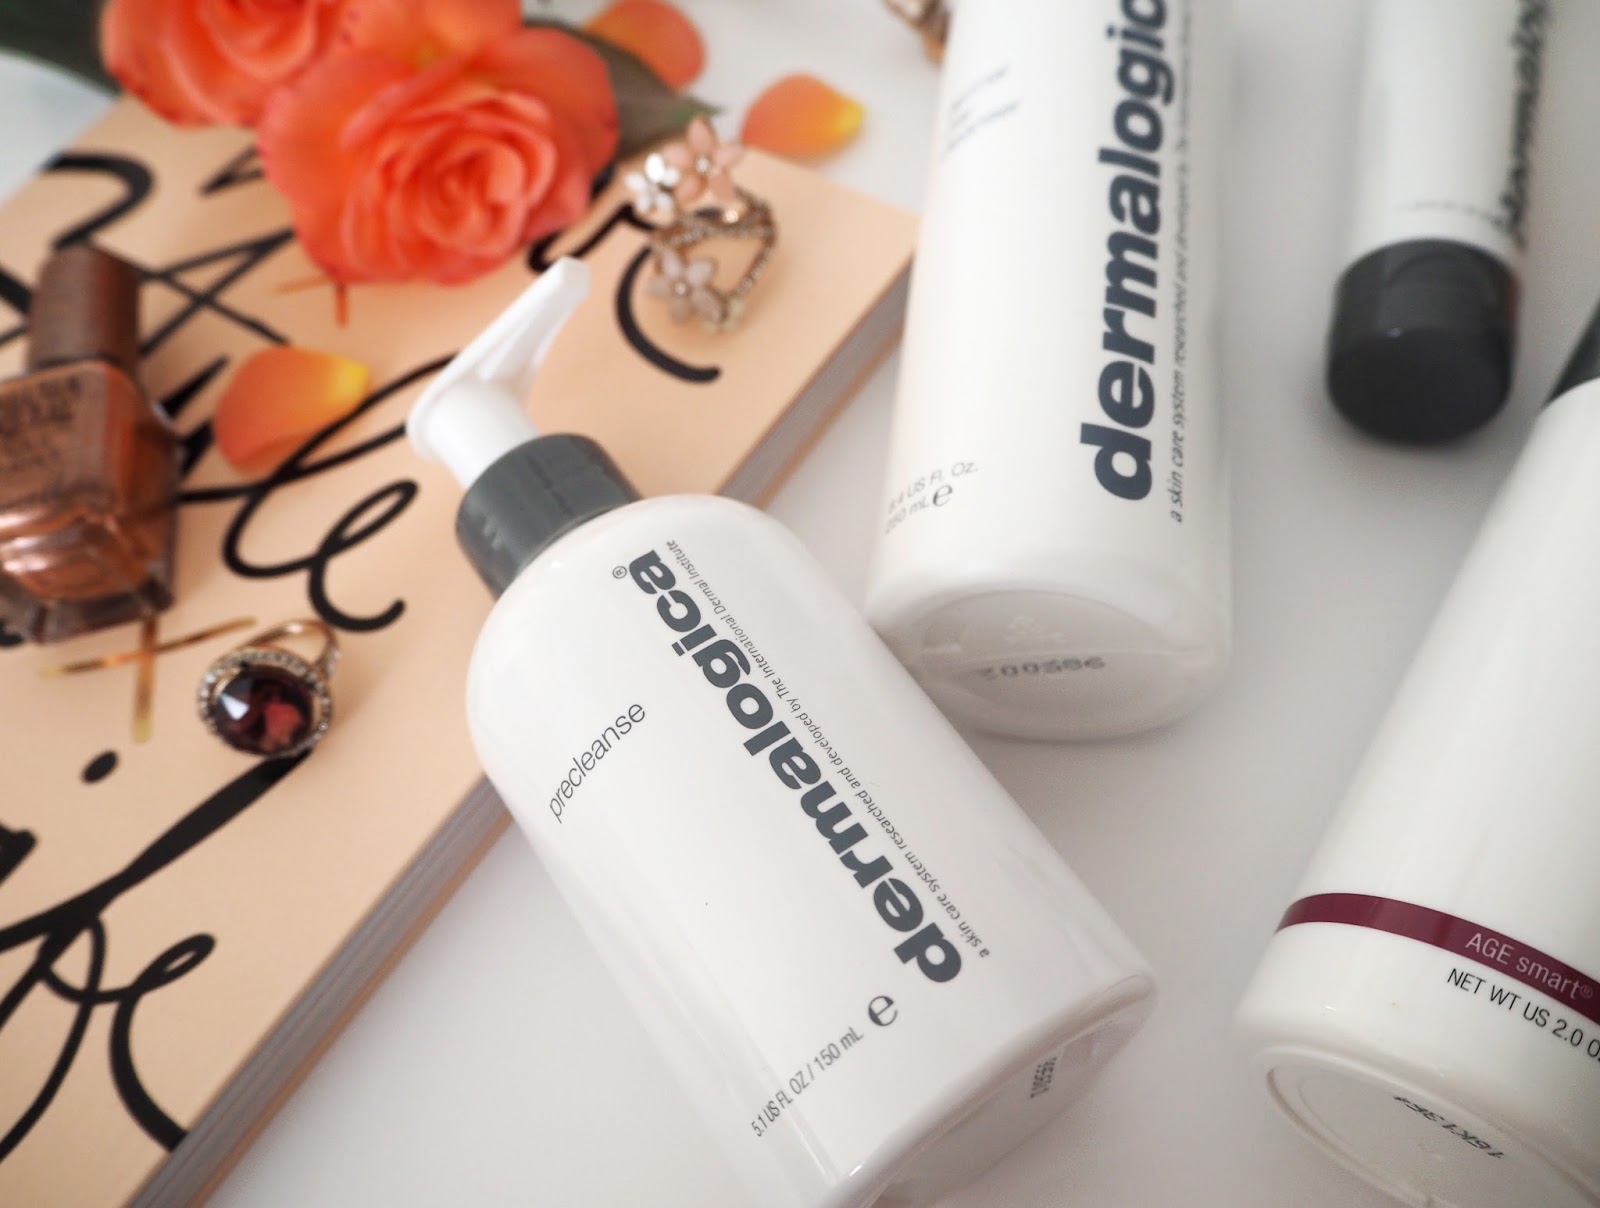 Dermalogica Face Mapping Skin Analysis, Beauty Blogger, UK Blogger, Skincare Review, Dermalogica Skincare Products